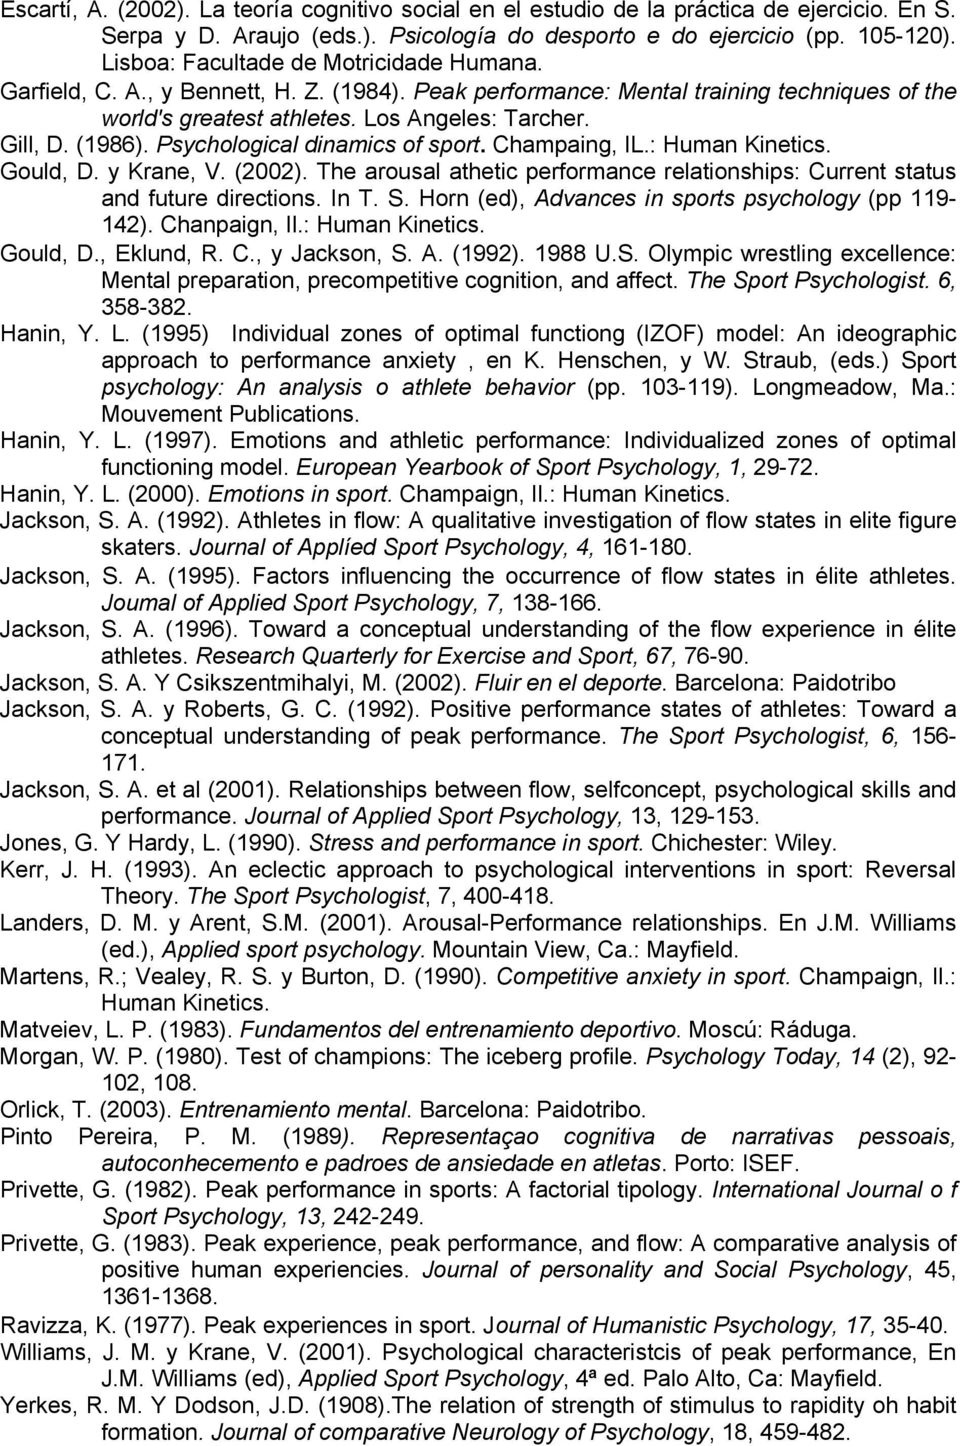 Psychological dinamics of sport. Champaing, IL.: Human Kinetics. Gould, D. y Krane, V. (2002). The arousal athetic performance relationships: Current status and future directions. In T. S.